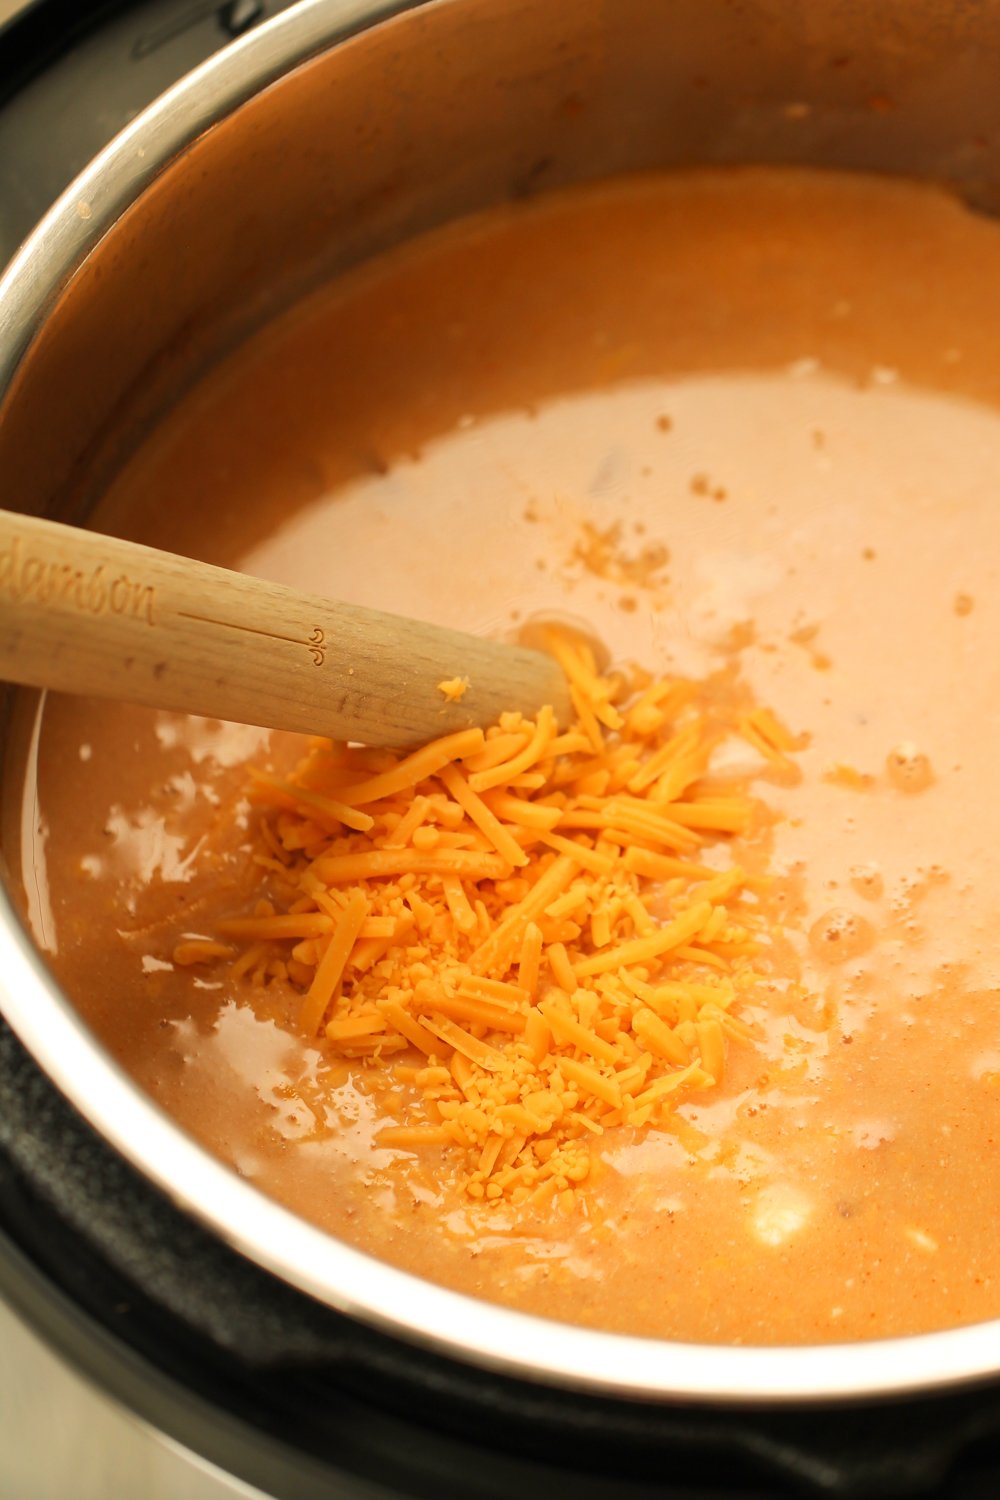 Shredded cheese added to the Instant Pot